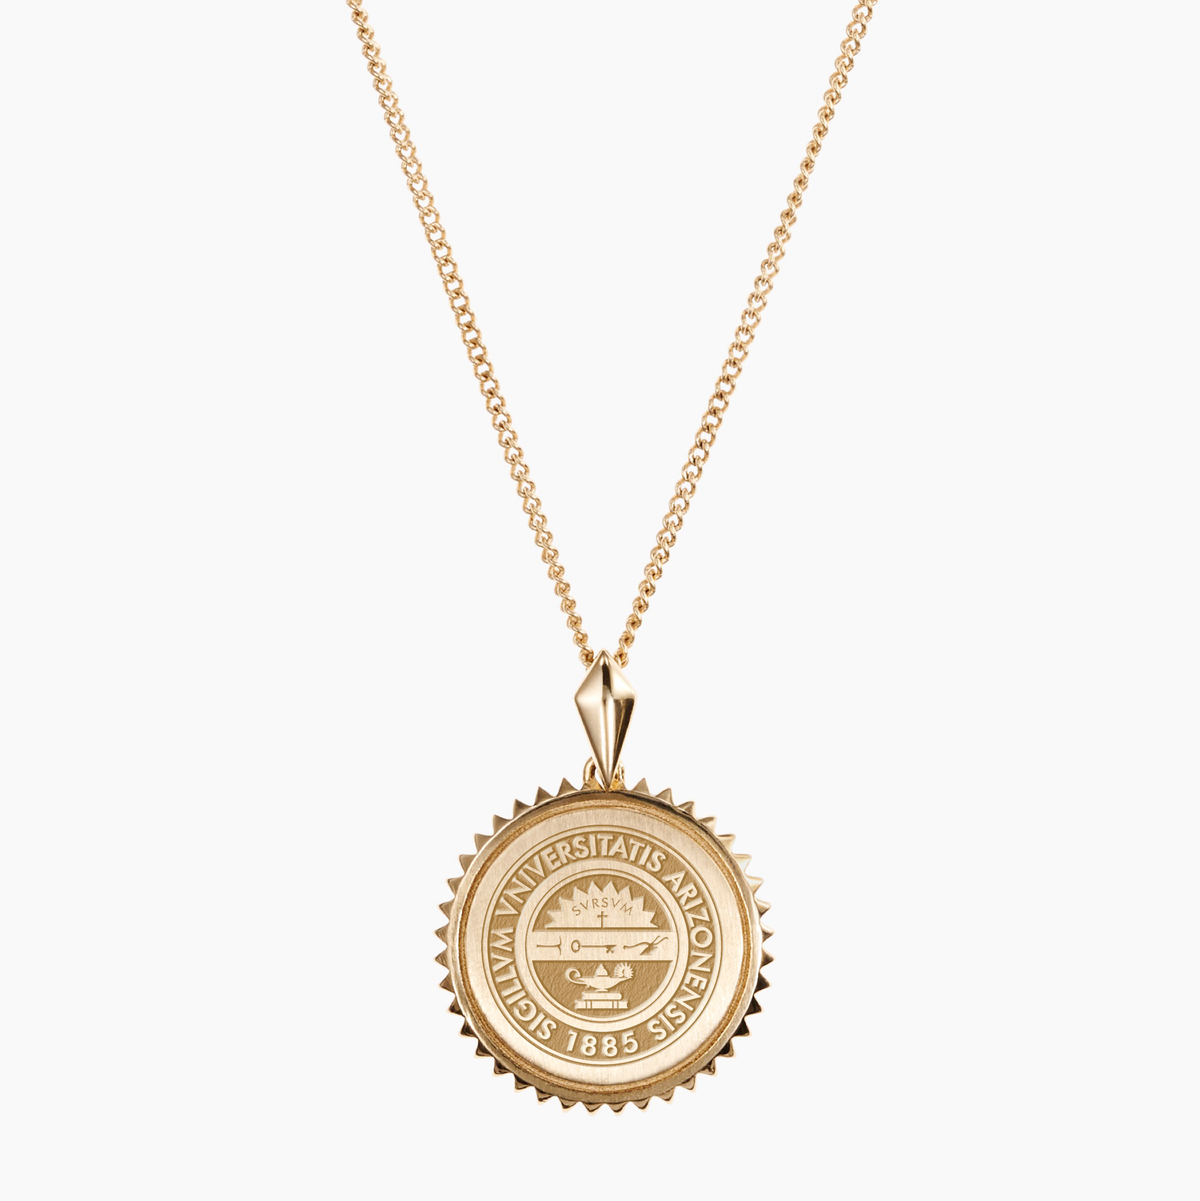 Arizona Seal Sunburst Necklace with Cable Chain